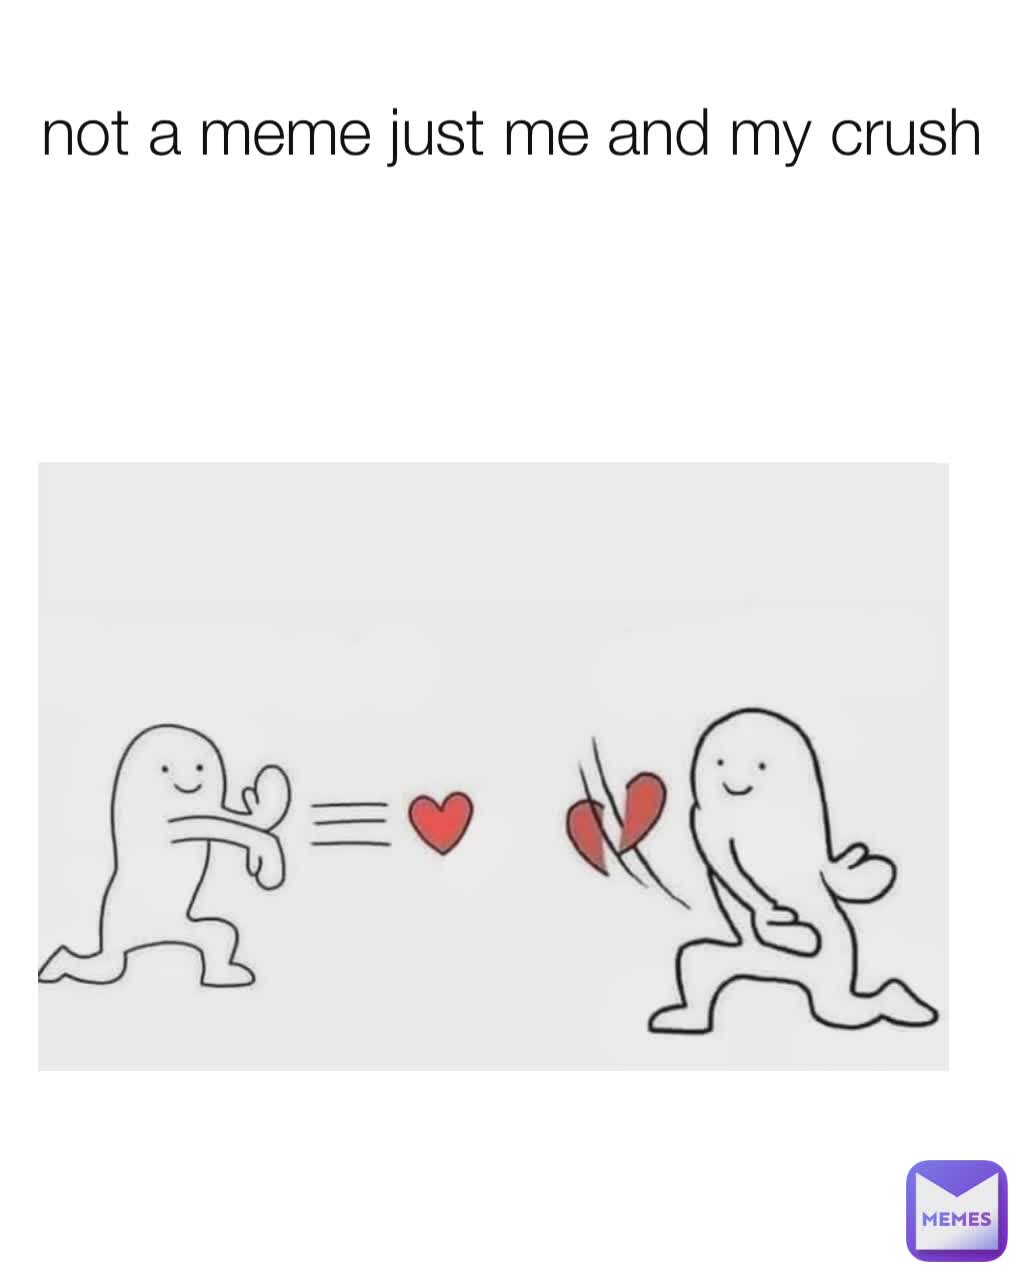 not a meme just me and my crush